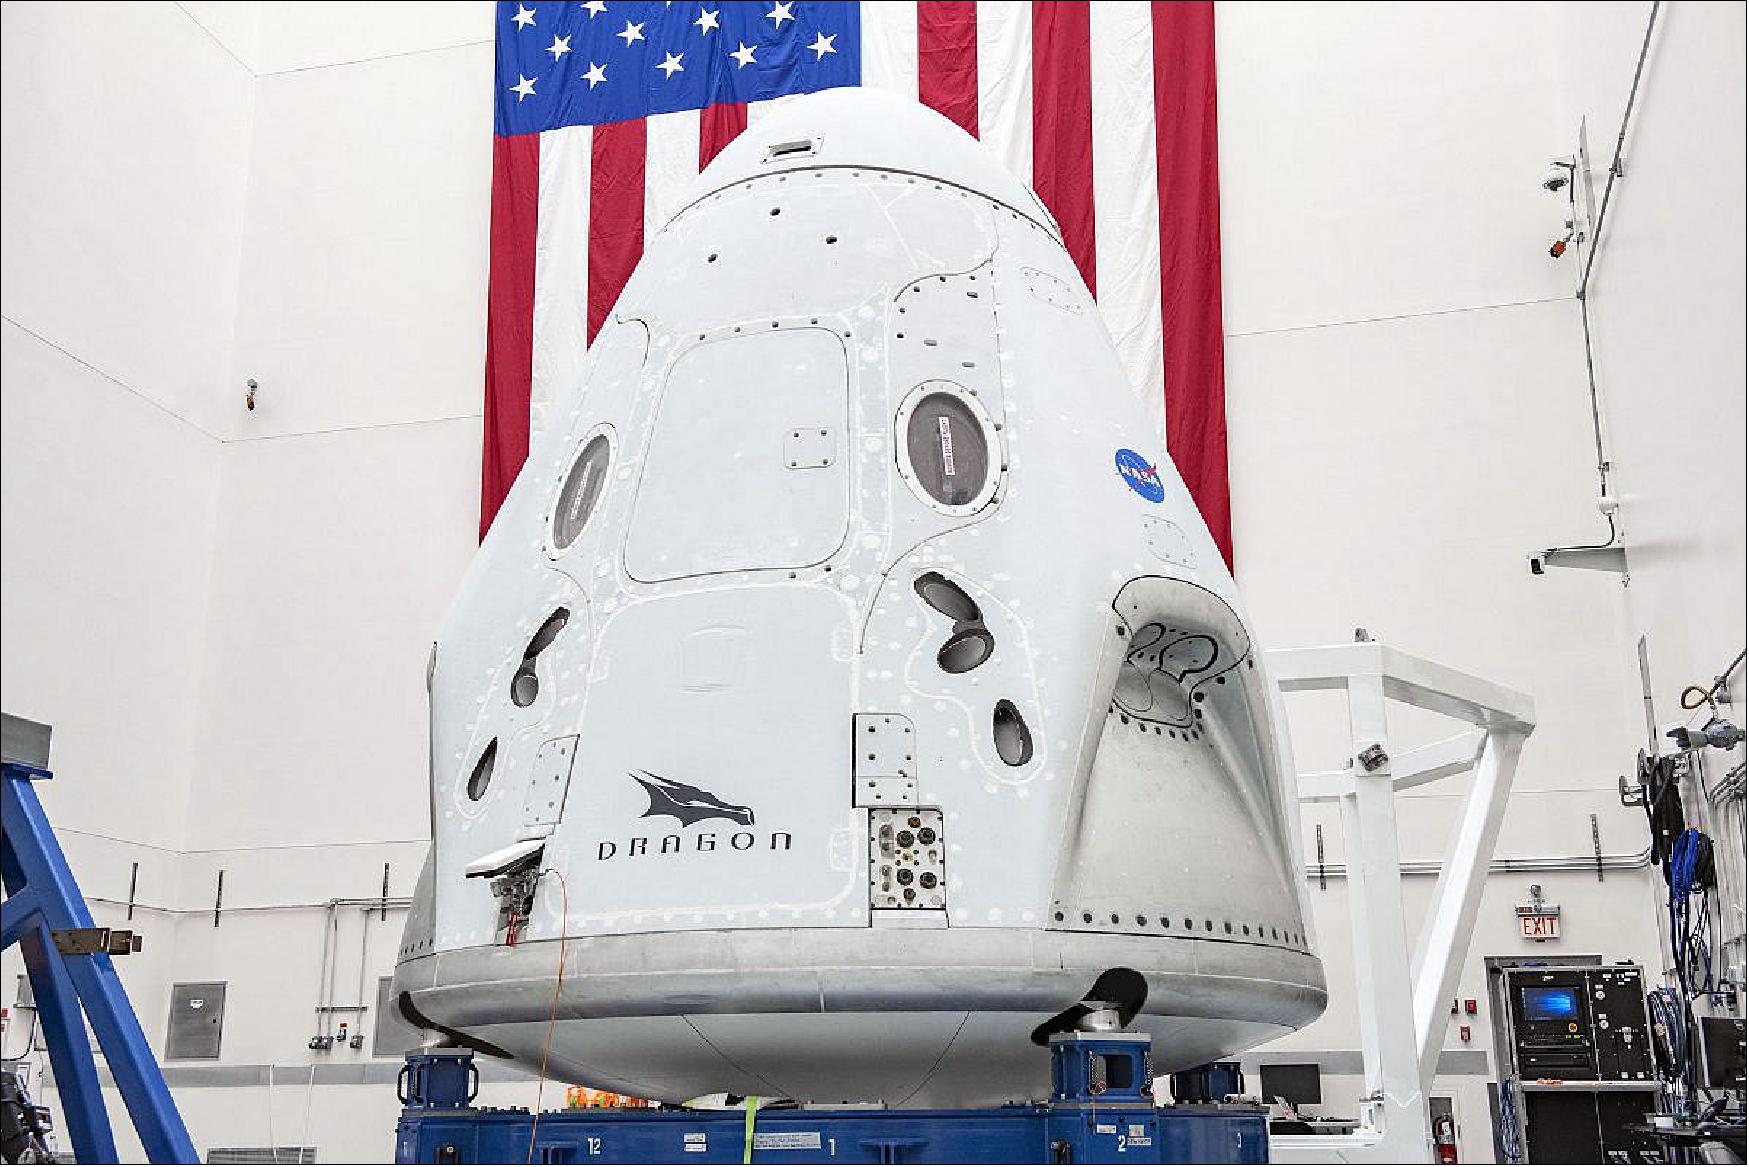 Figure 18: The SpaceX Crew Dragon spacecraft undergoes final processing at Cape Canaveral Air Force Station, Florida, in preparation for the Demo-2 launch with NASA astronauts Bob Behnken and Doug Hurley to the International Space Station for NASA’s Commercial Crew Program. Crew Dragon will carry Behnken and Hurley atop a Falcon 9 rocket, returning crew launches to the space station from U.S. soil for the first time since the Space Shuttle Program ended in 2011 (photo credit: SpaceX)